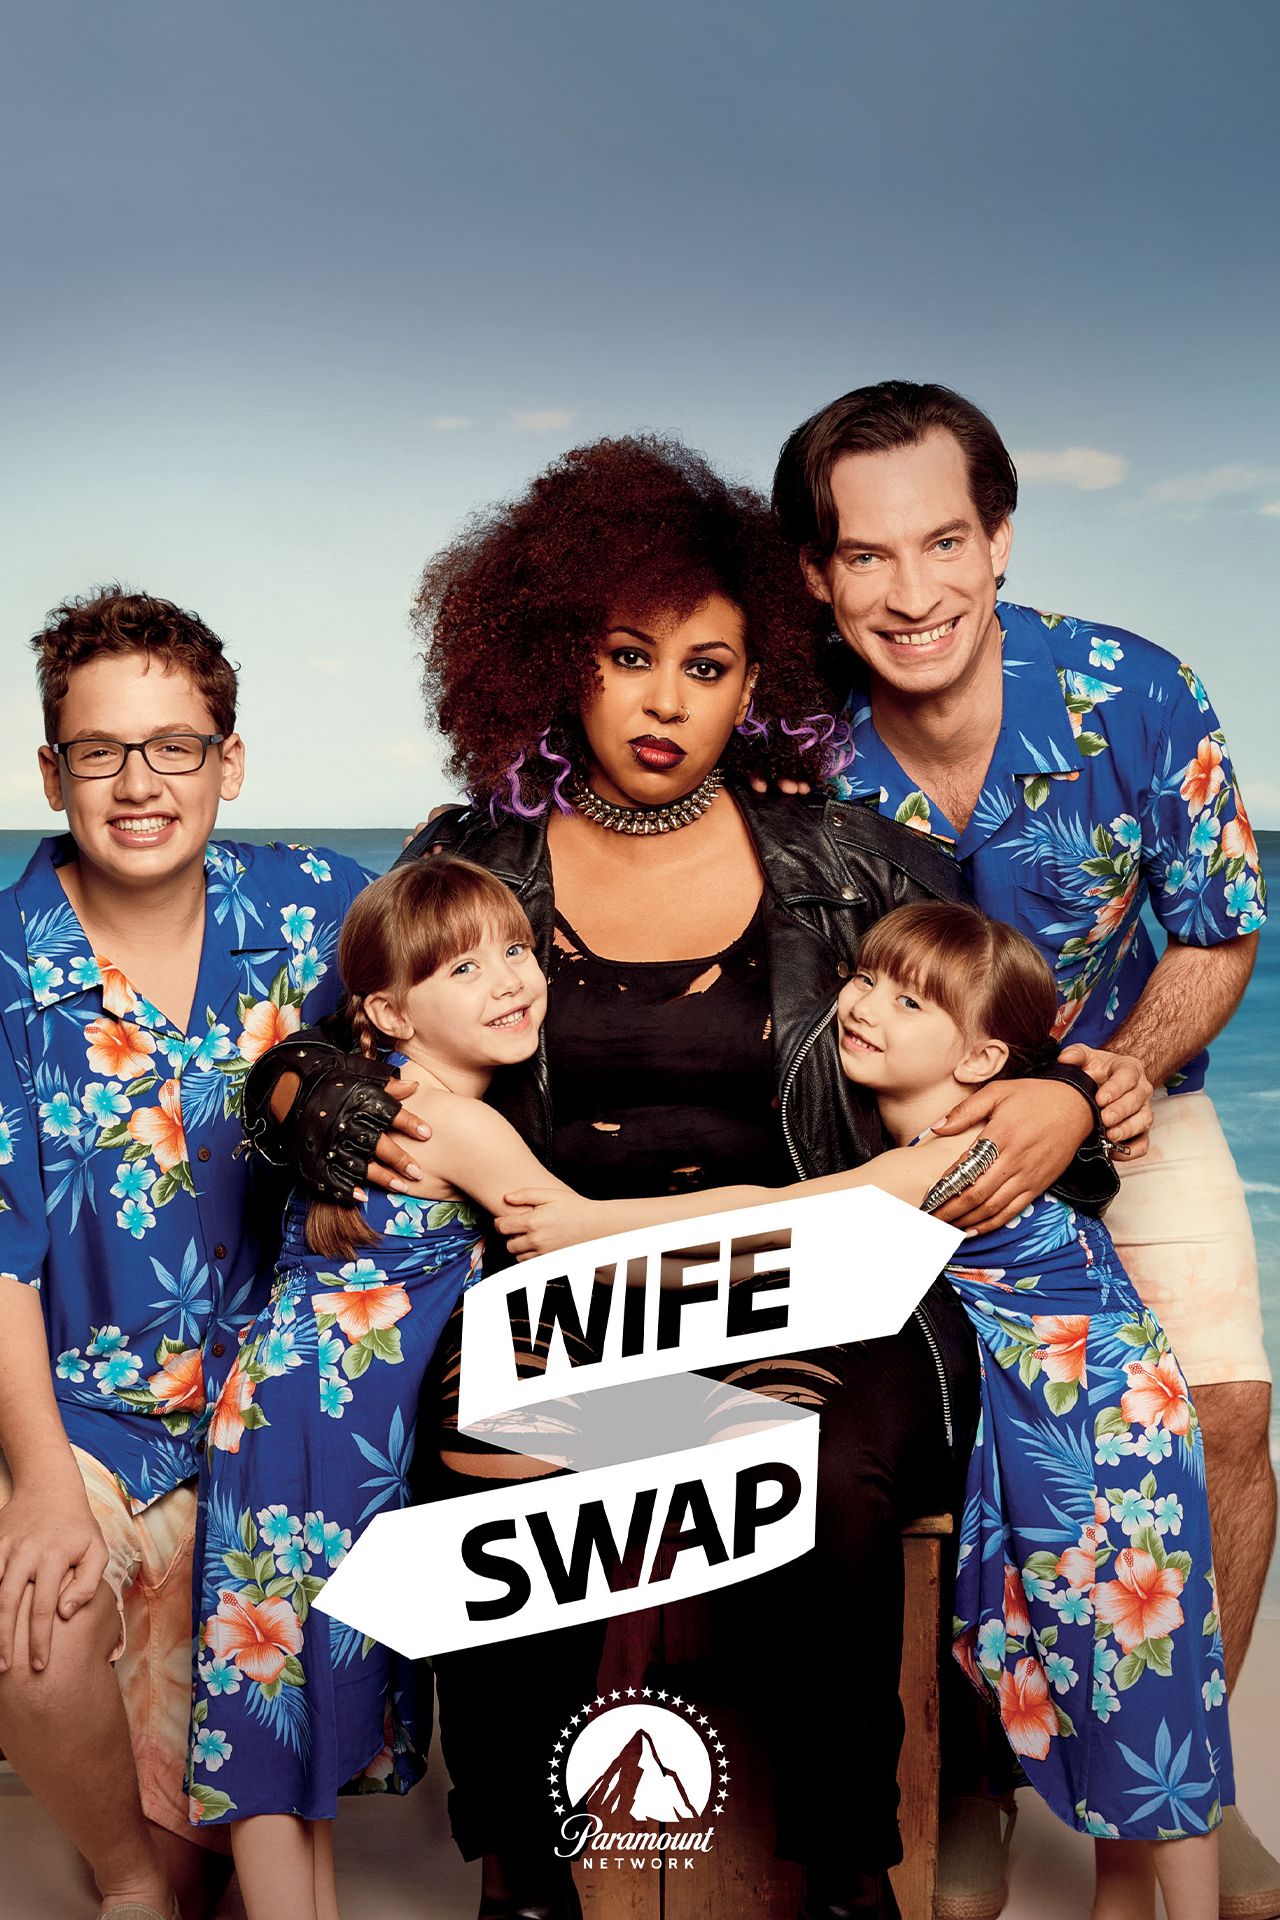 force to wife swap